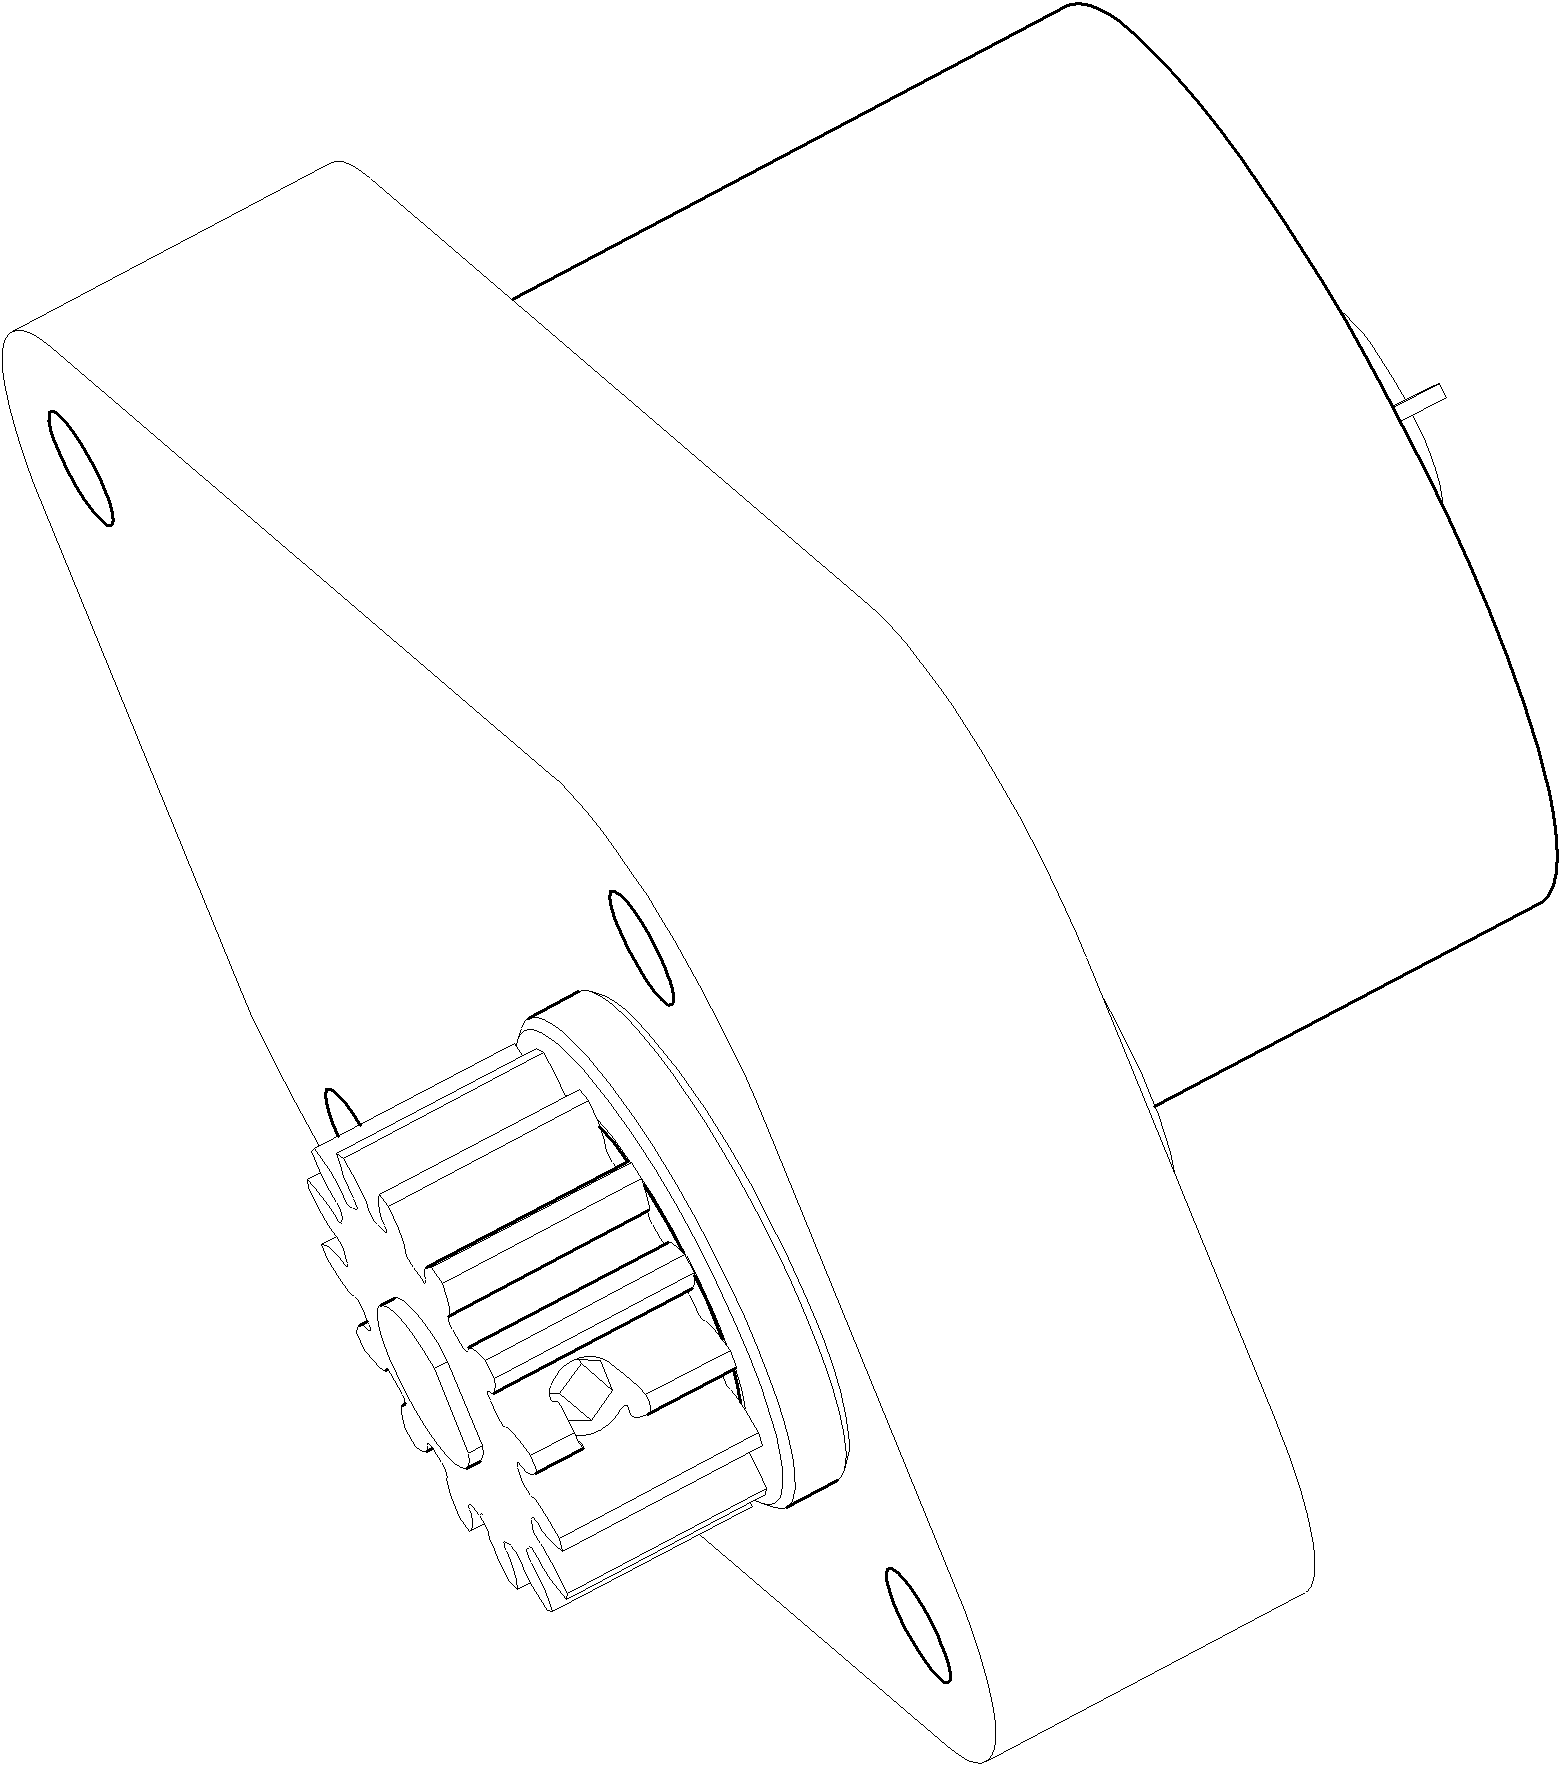 Fixed connection structure between gear and gear shaft